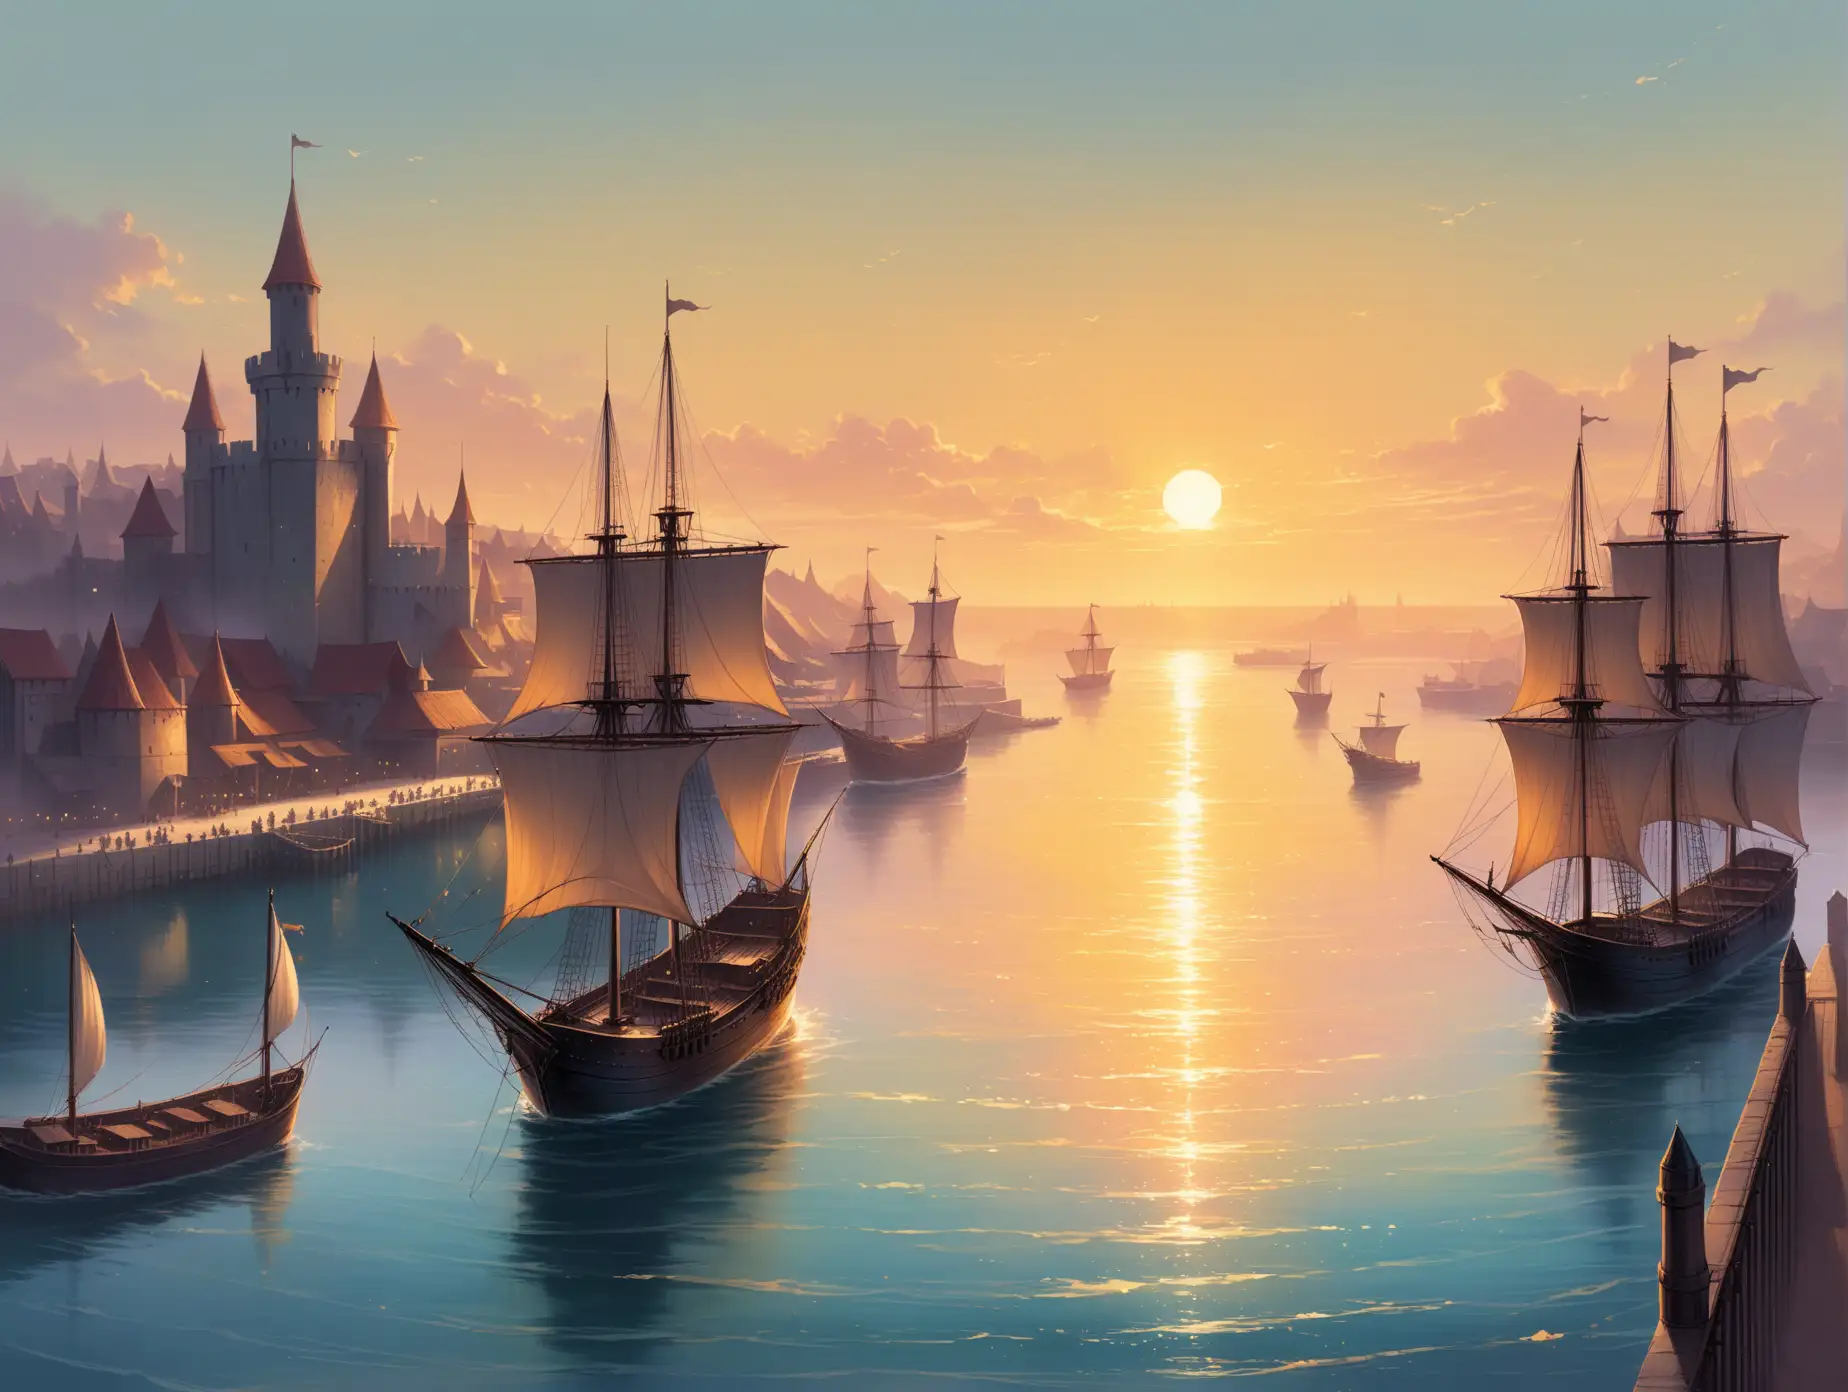 Port, morning, small ships with sails in the port, medieval times, distant background, fantasy, Charlie Bowater, pastel